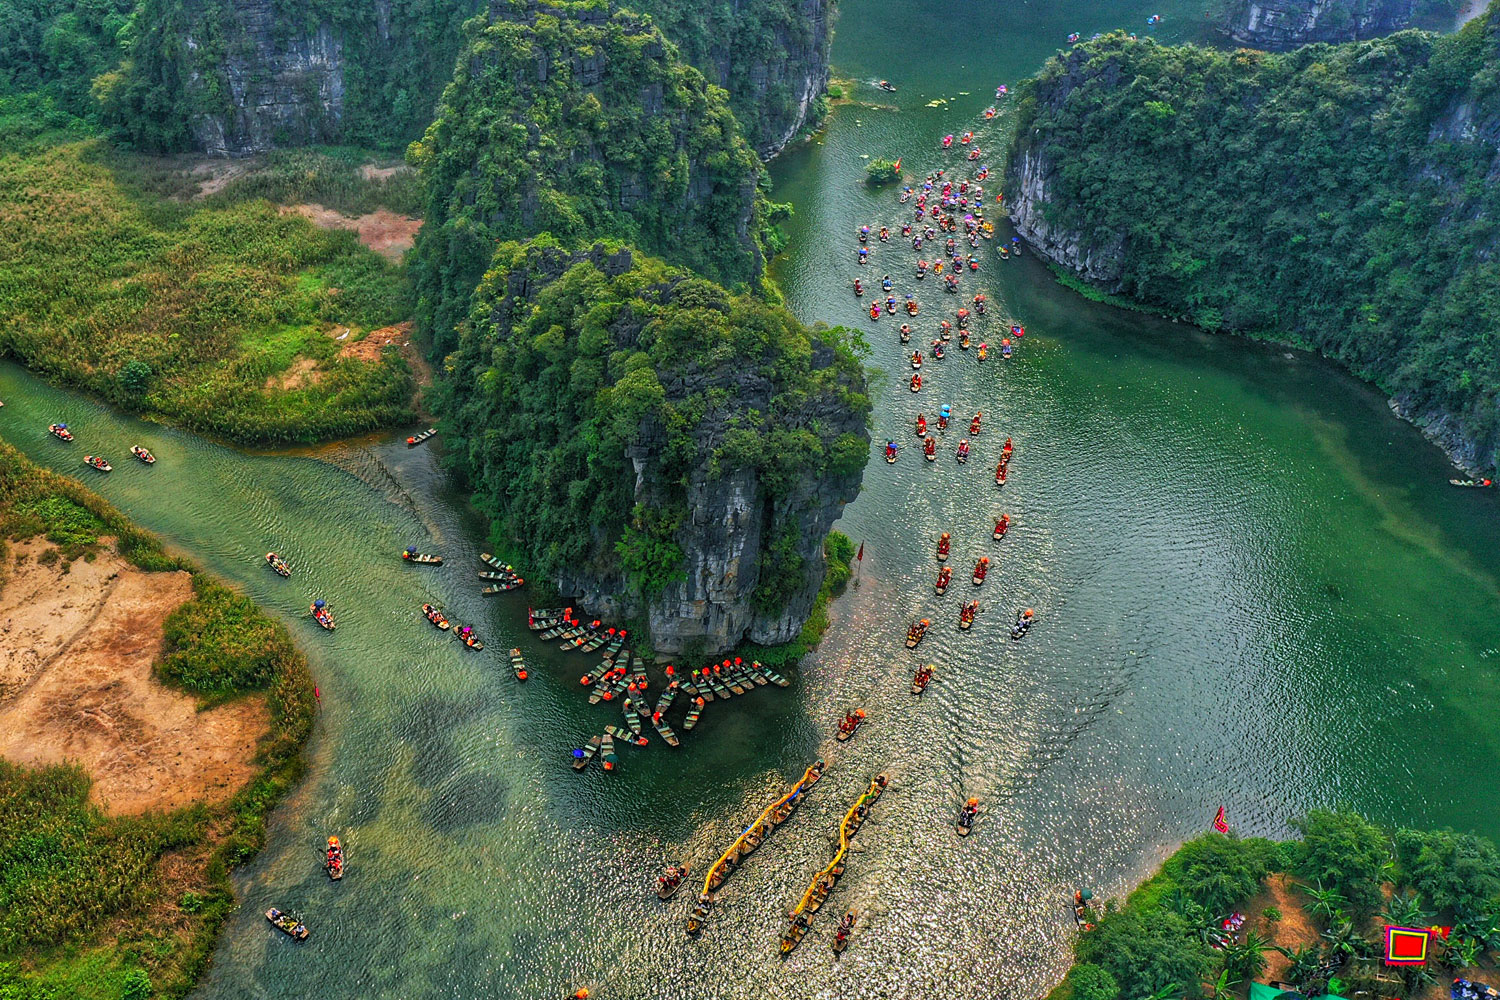 Ninh Binh's natural habitat is mysterious with 31 lakes connected by 48 caves